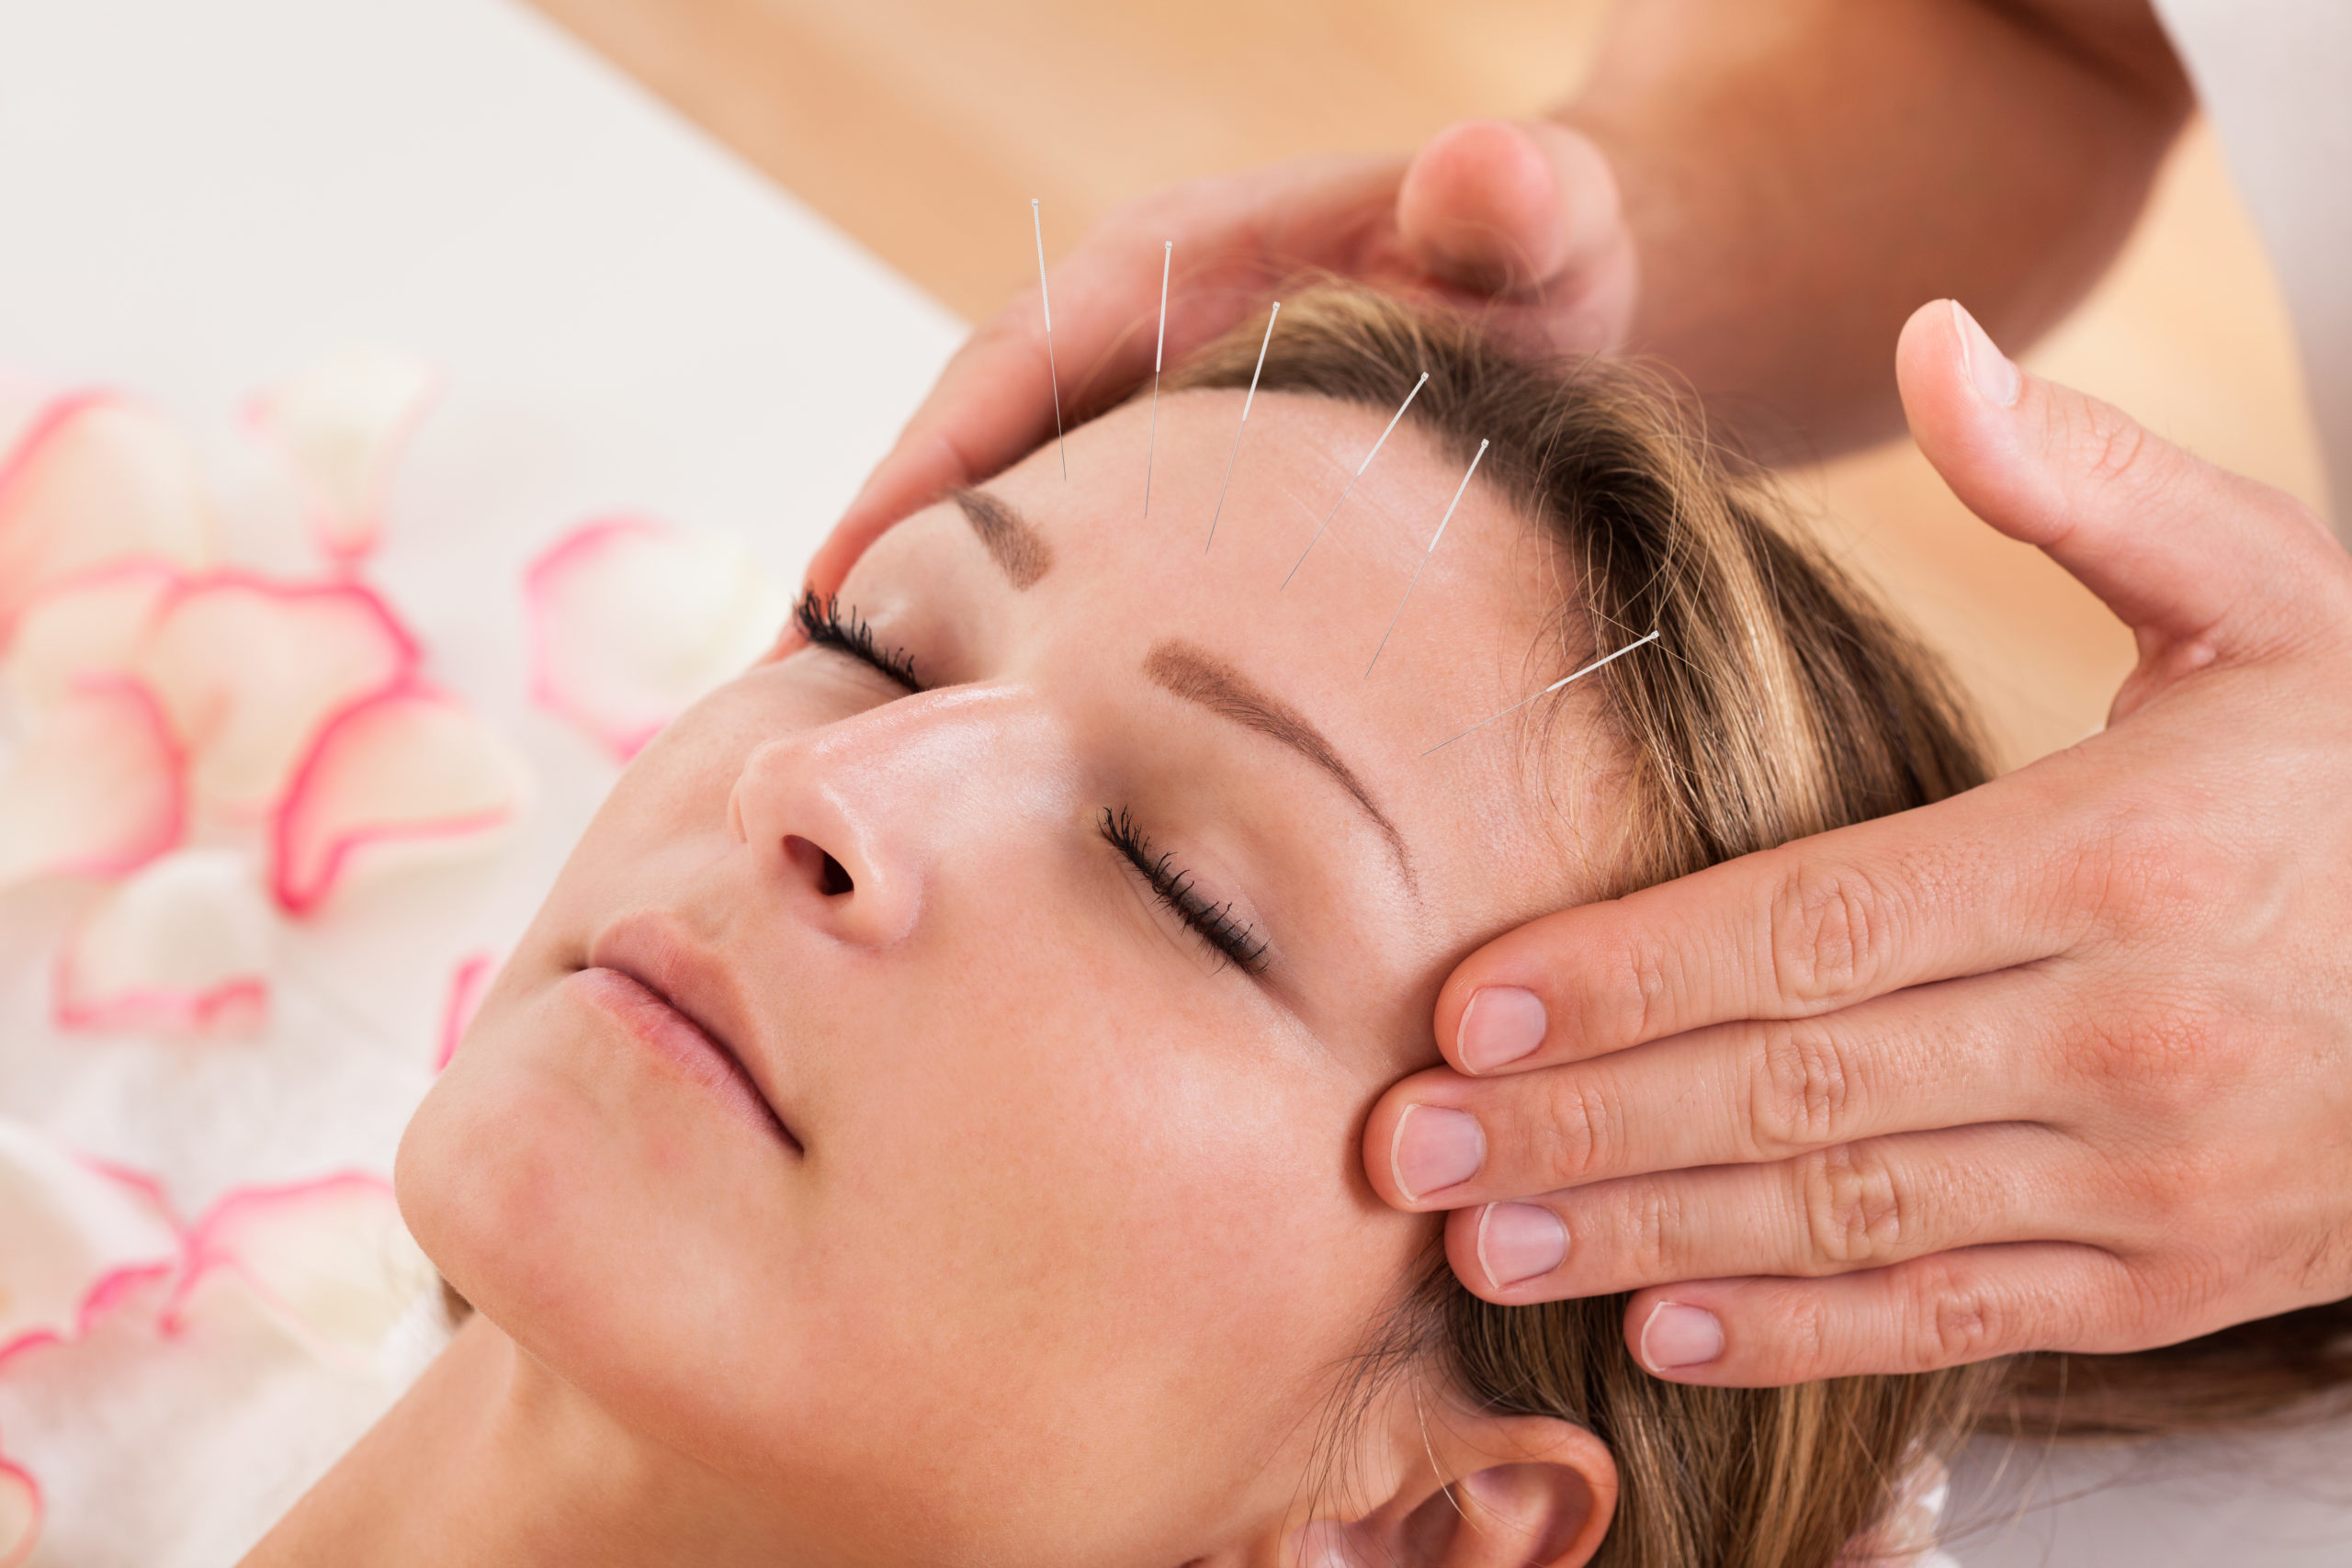 Woman undergoing acupuncture treatment and a massage